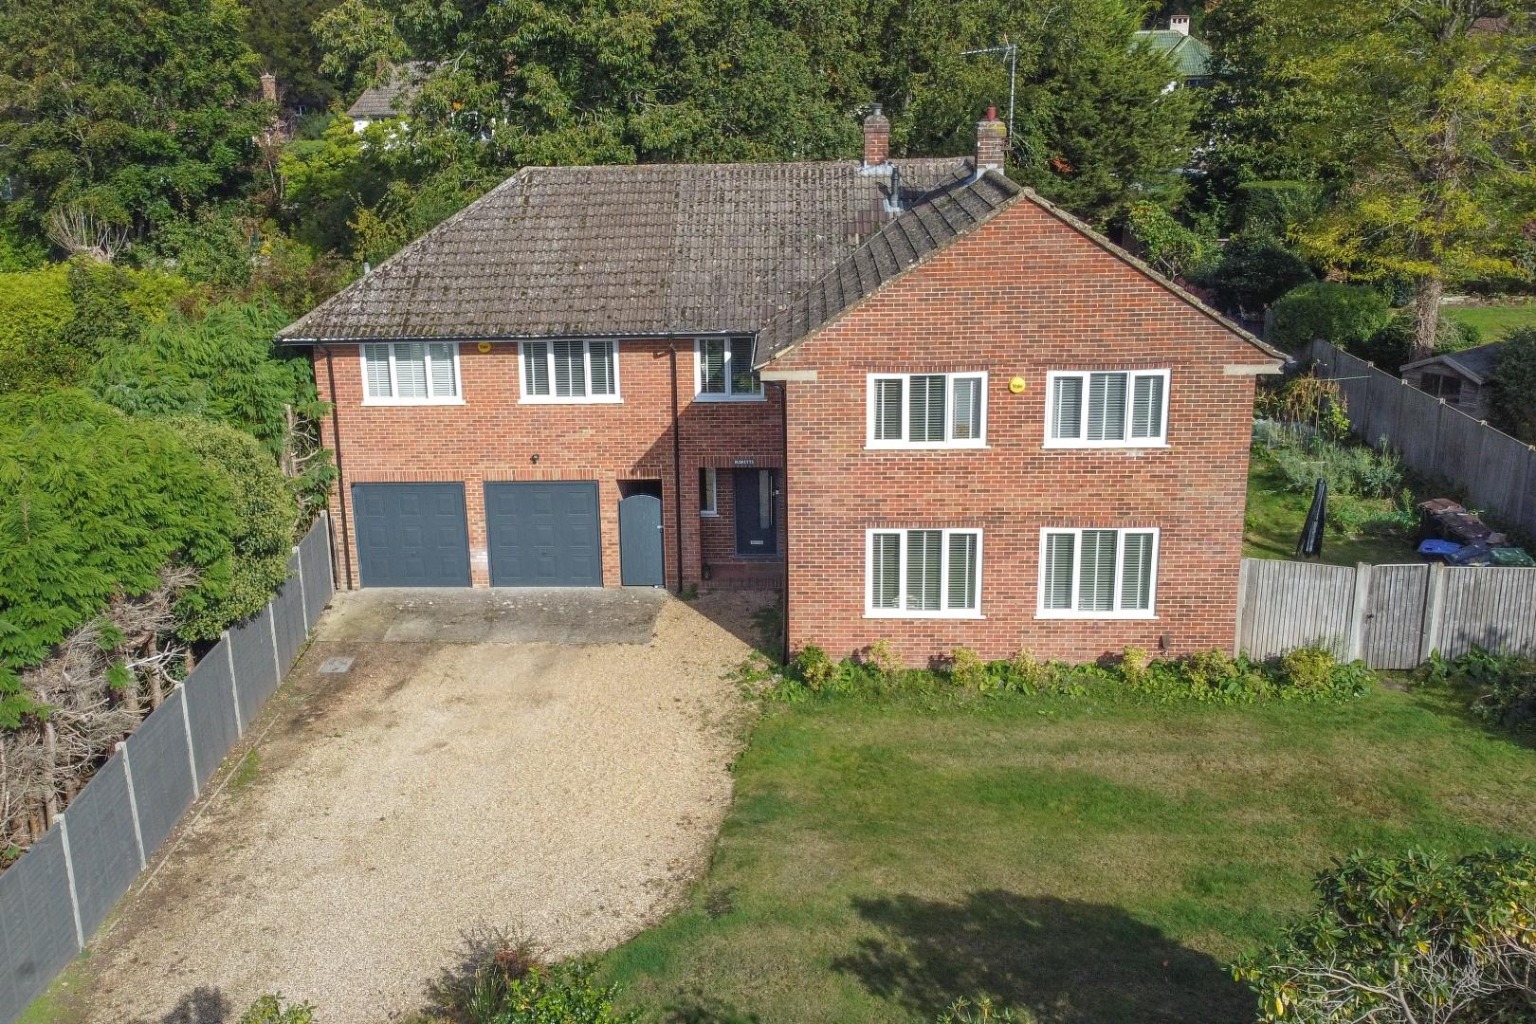 *MARKETED BY CHRIS GRAY*  Welcome to Busketts, a substantial family home with accommodation in excess of 3100 sqft, yet with planning permission to increase this to approximately 4000 sqft, situated in one of Camberley's most sought-after roads on a plot of just under a third of an acre.